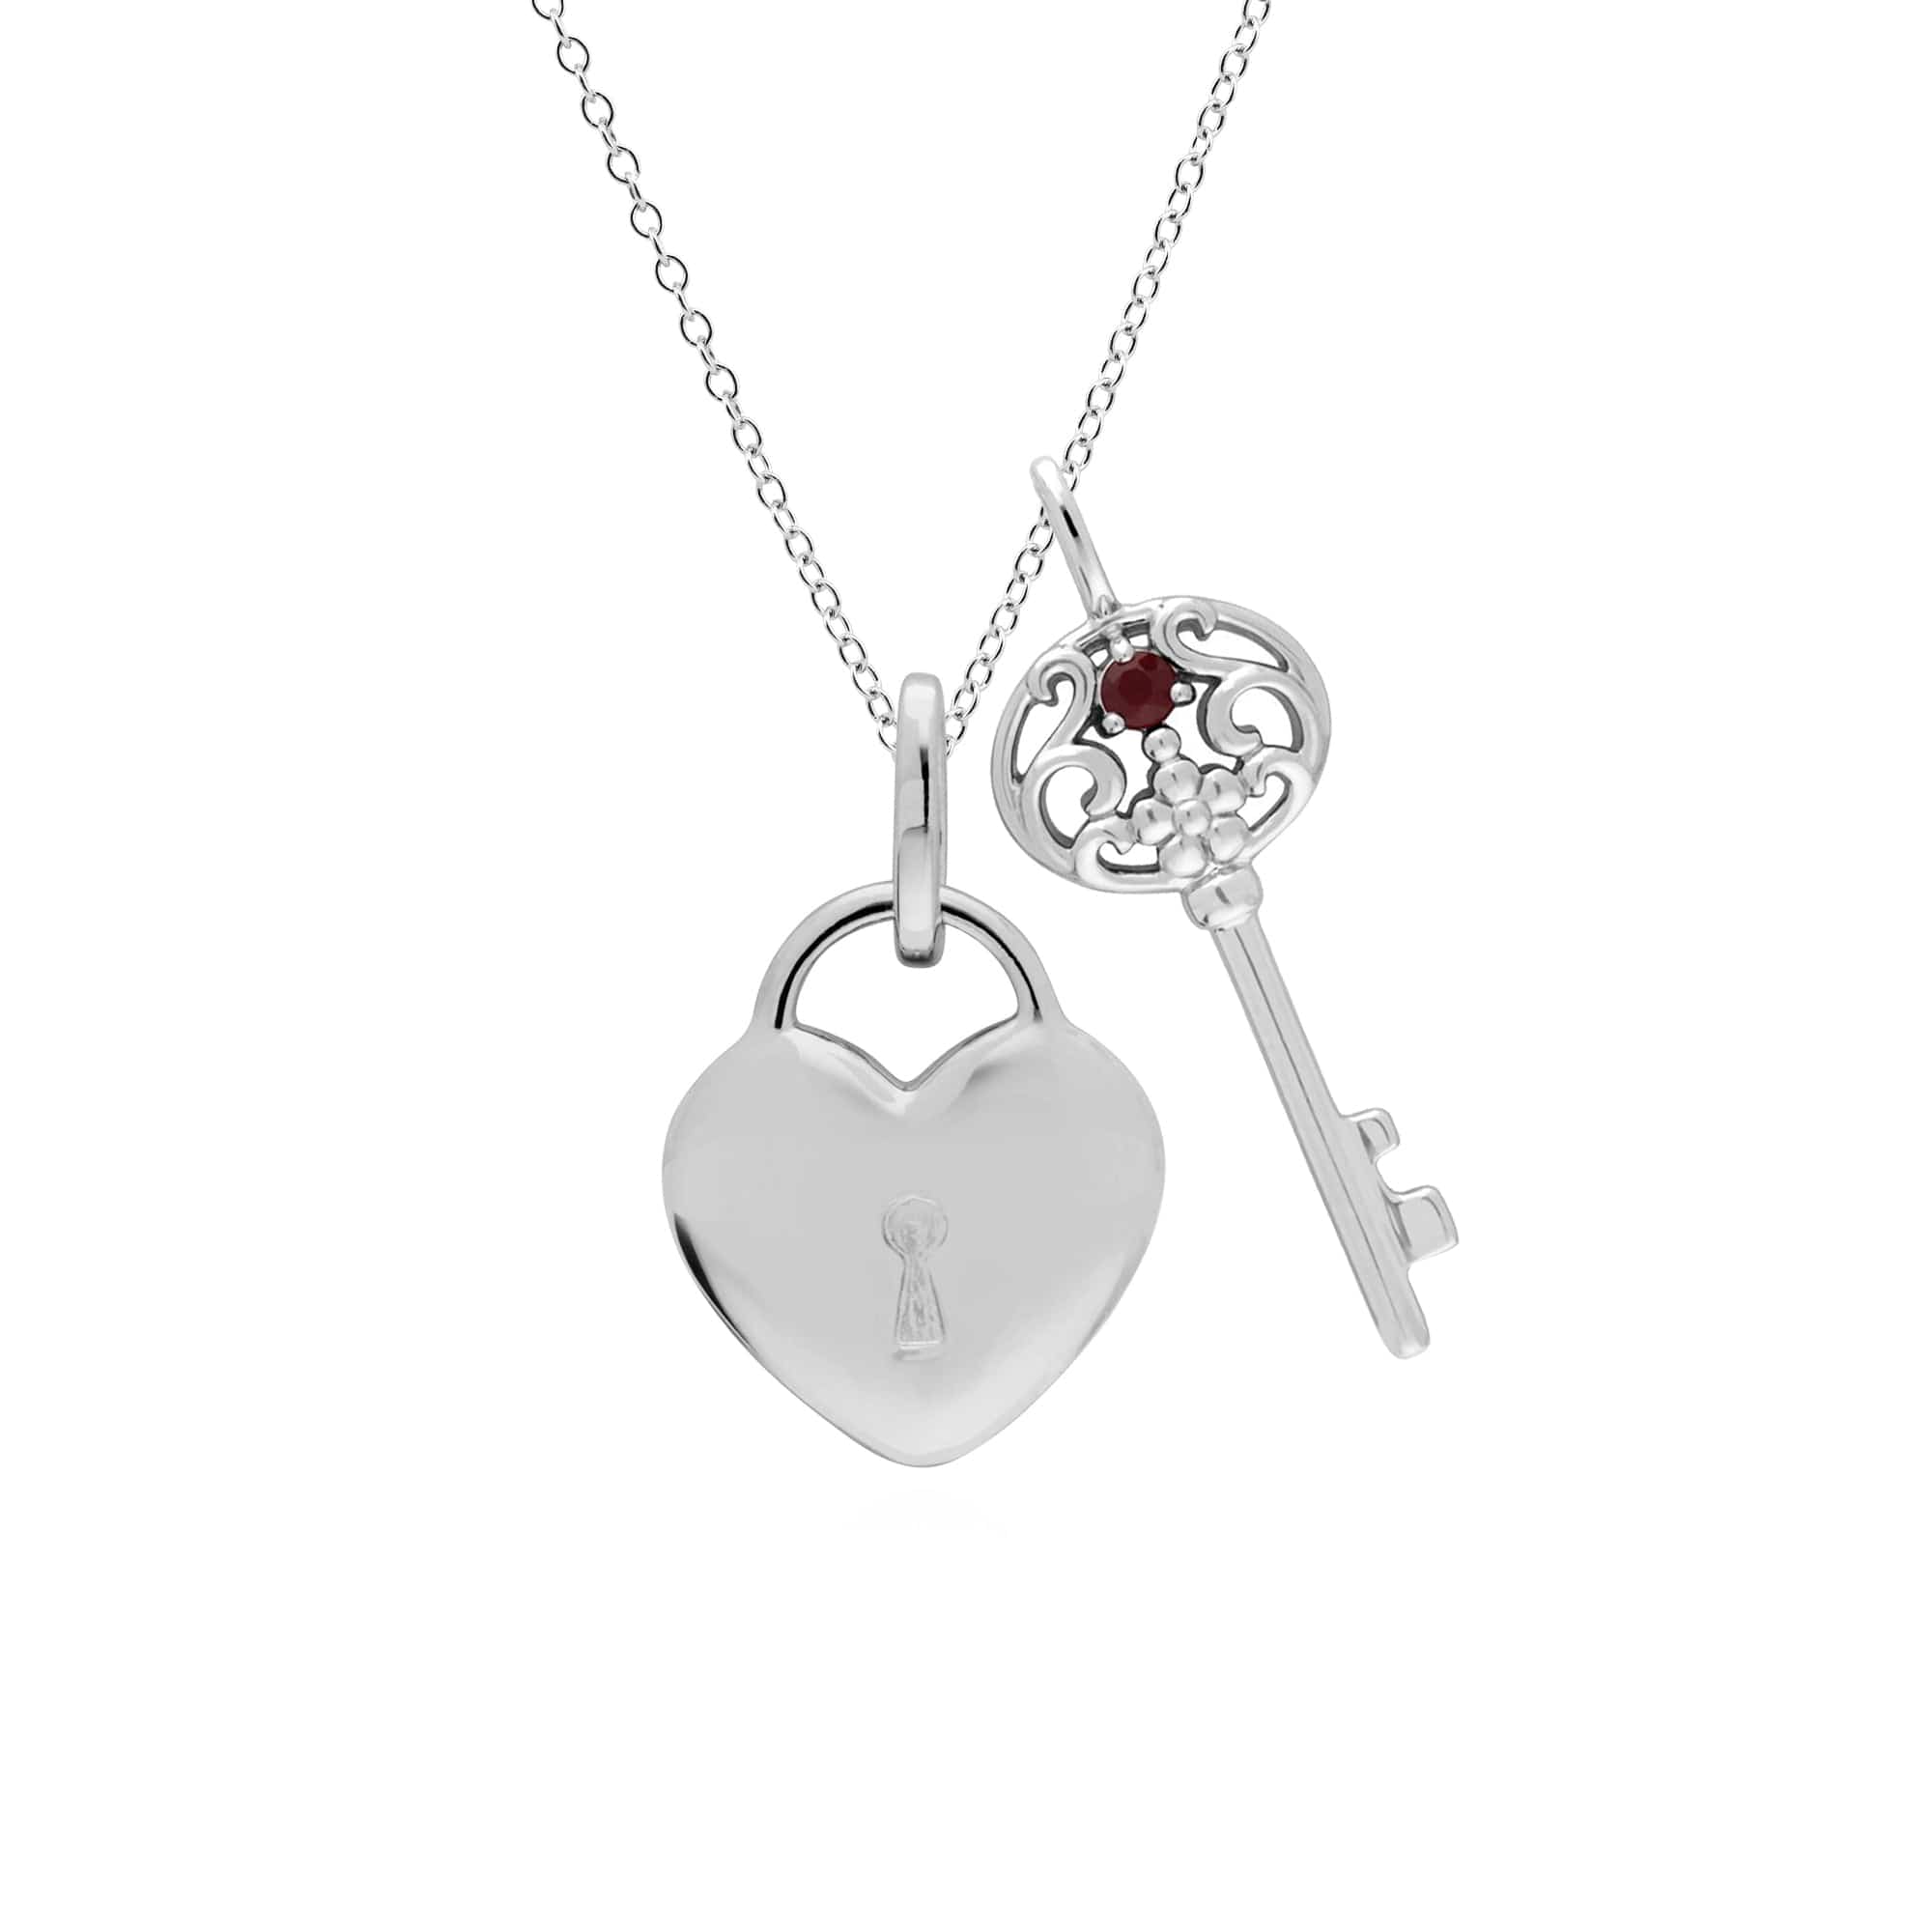 270P026806925-270P027001925 Classic Heart Lock Pendant & Ruby Big Key Charm in 925 Sterling Silver 1